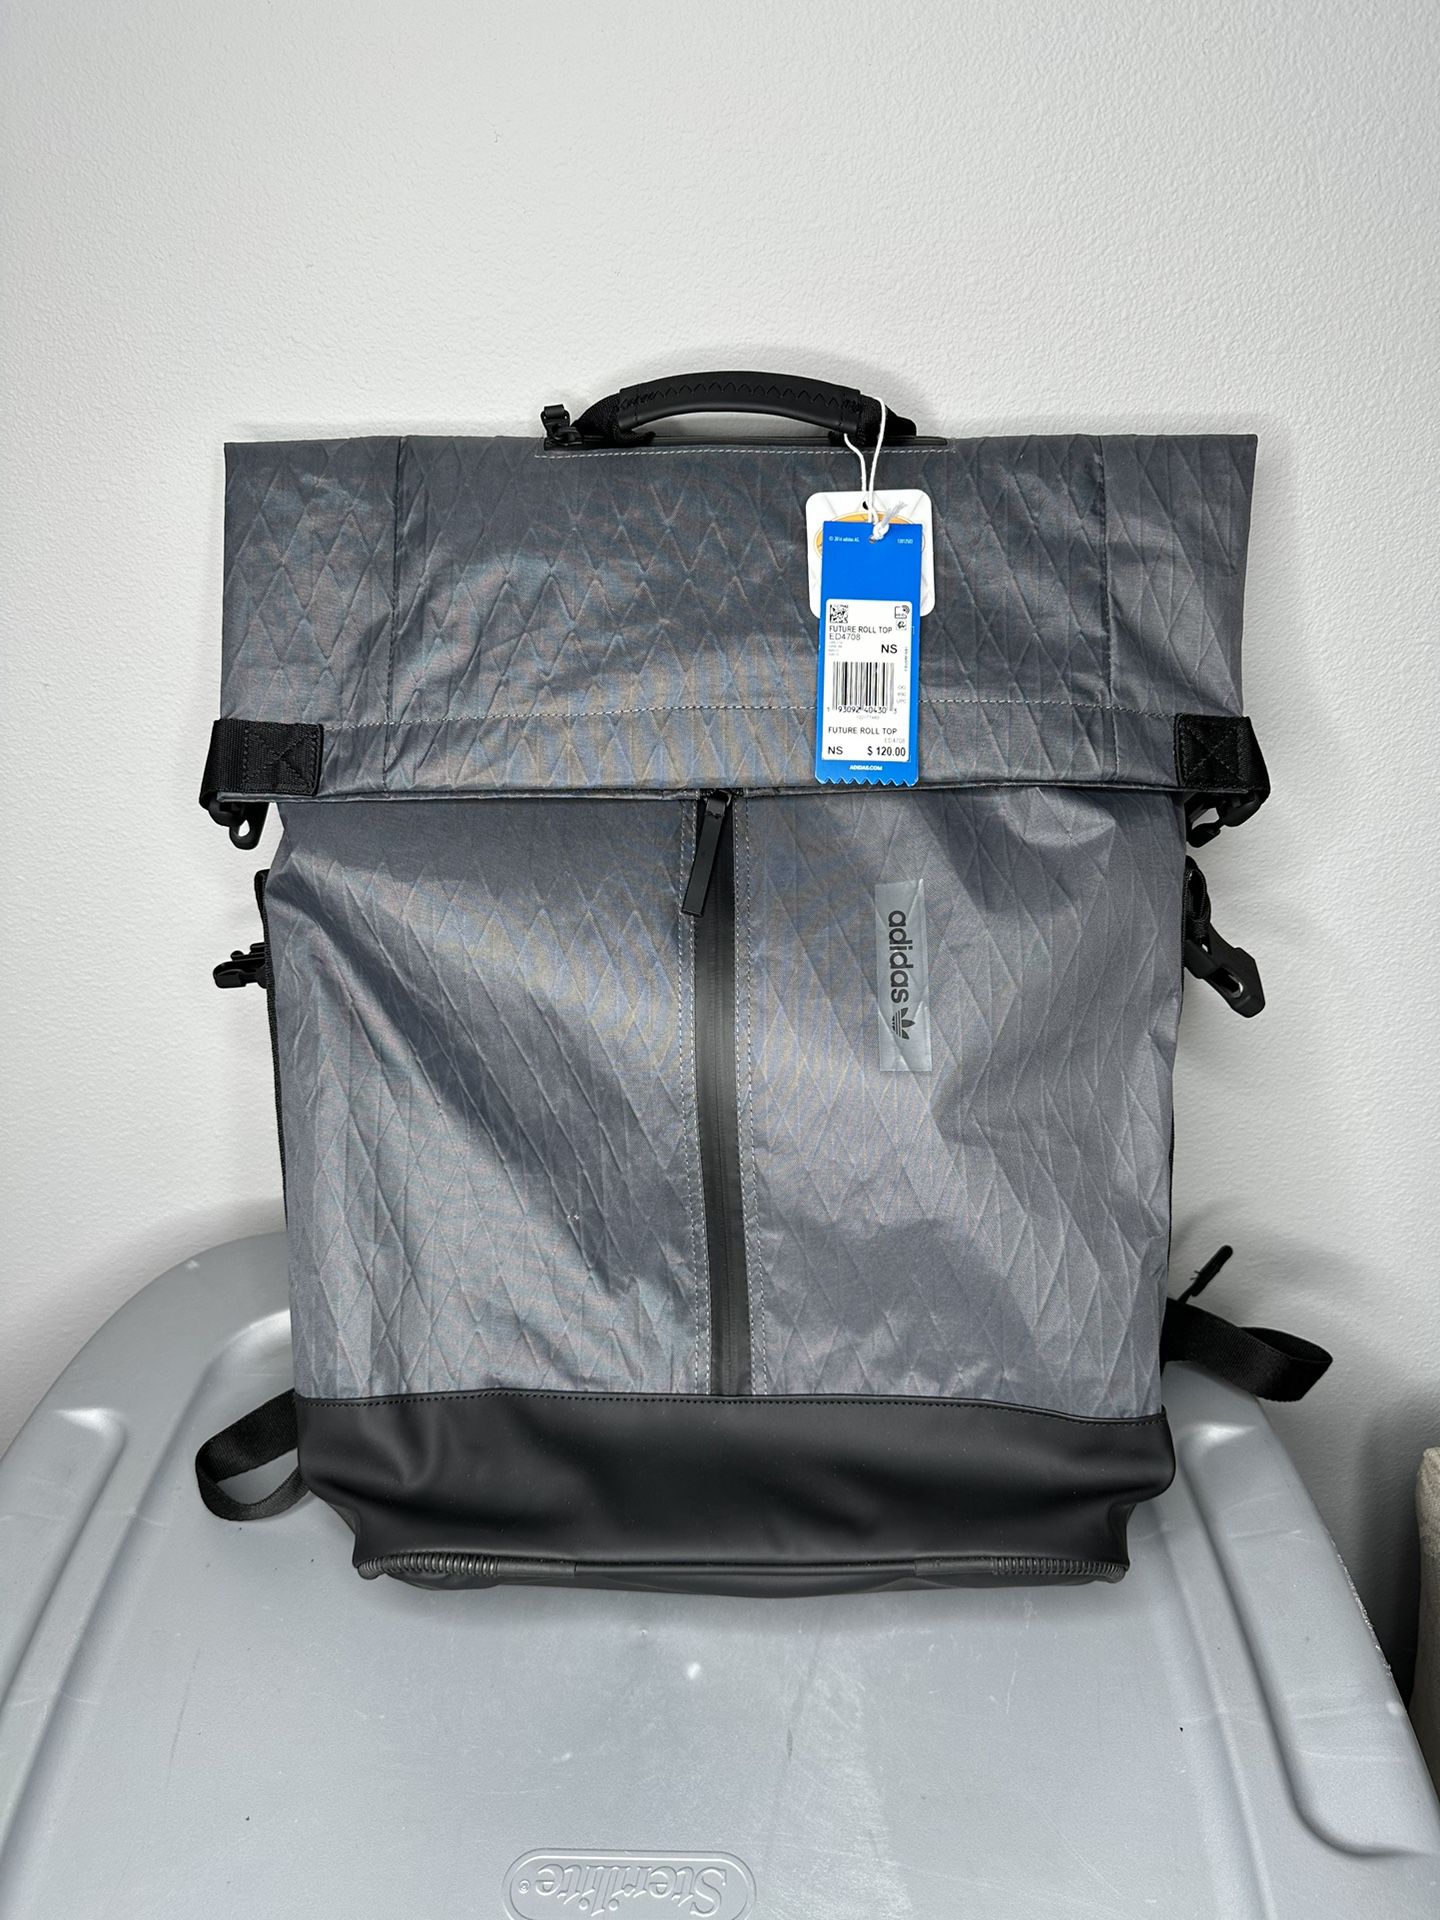 Adidas Future Rolltop Backpack BRAND NEW w/TAG